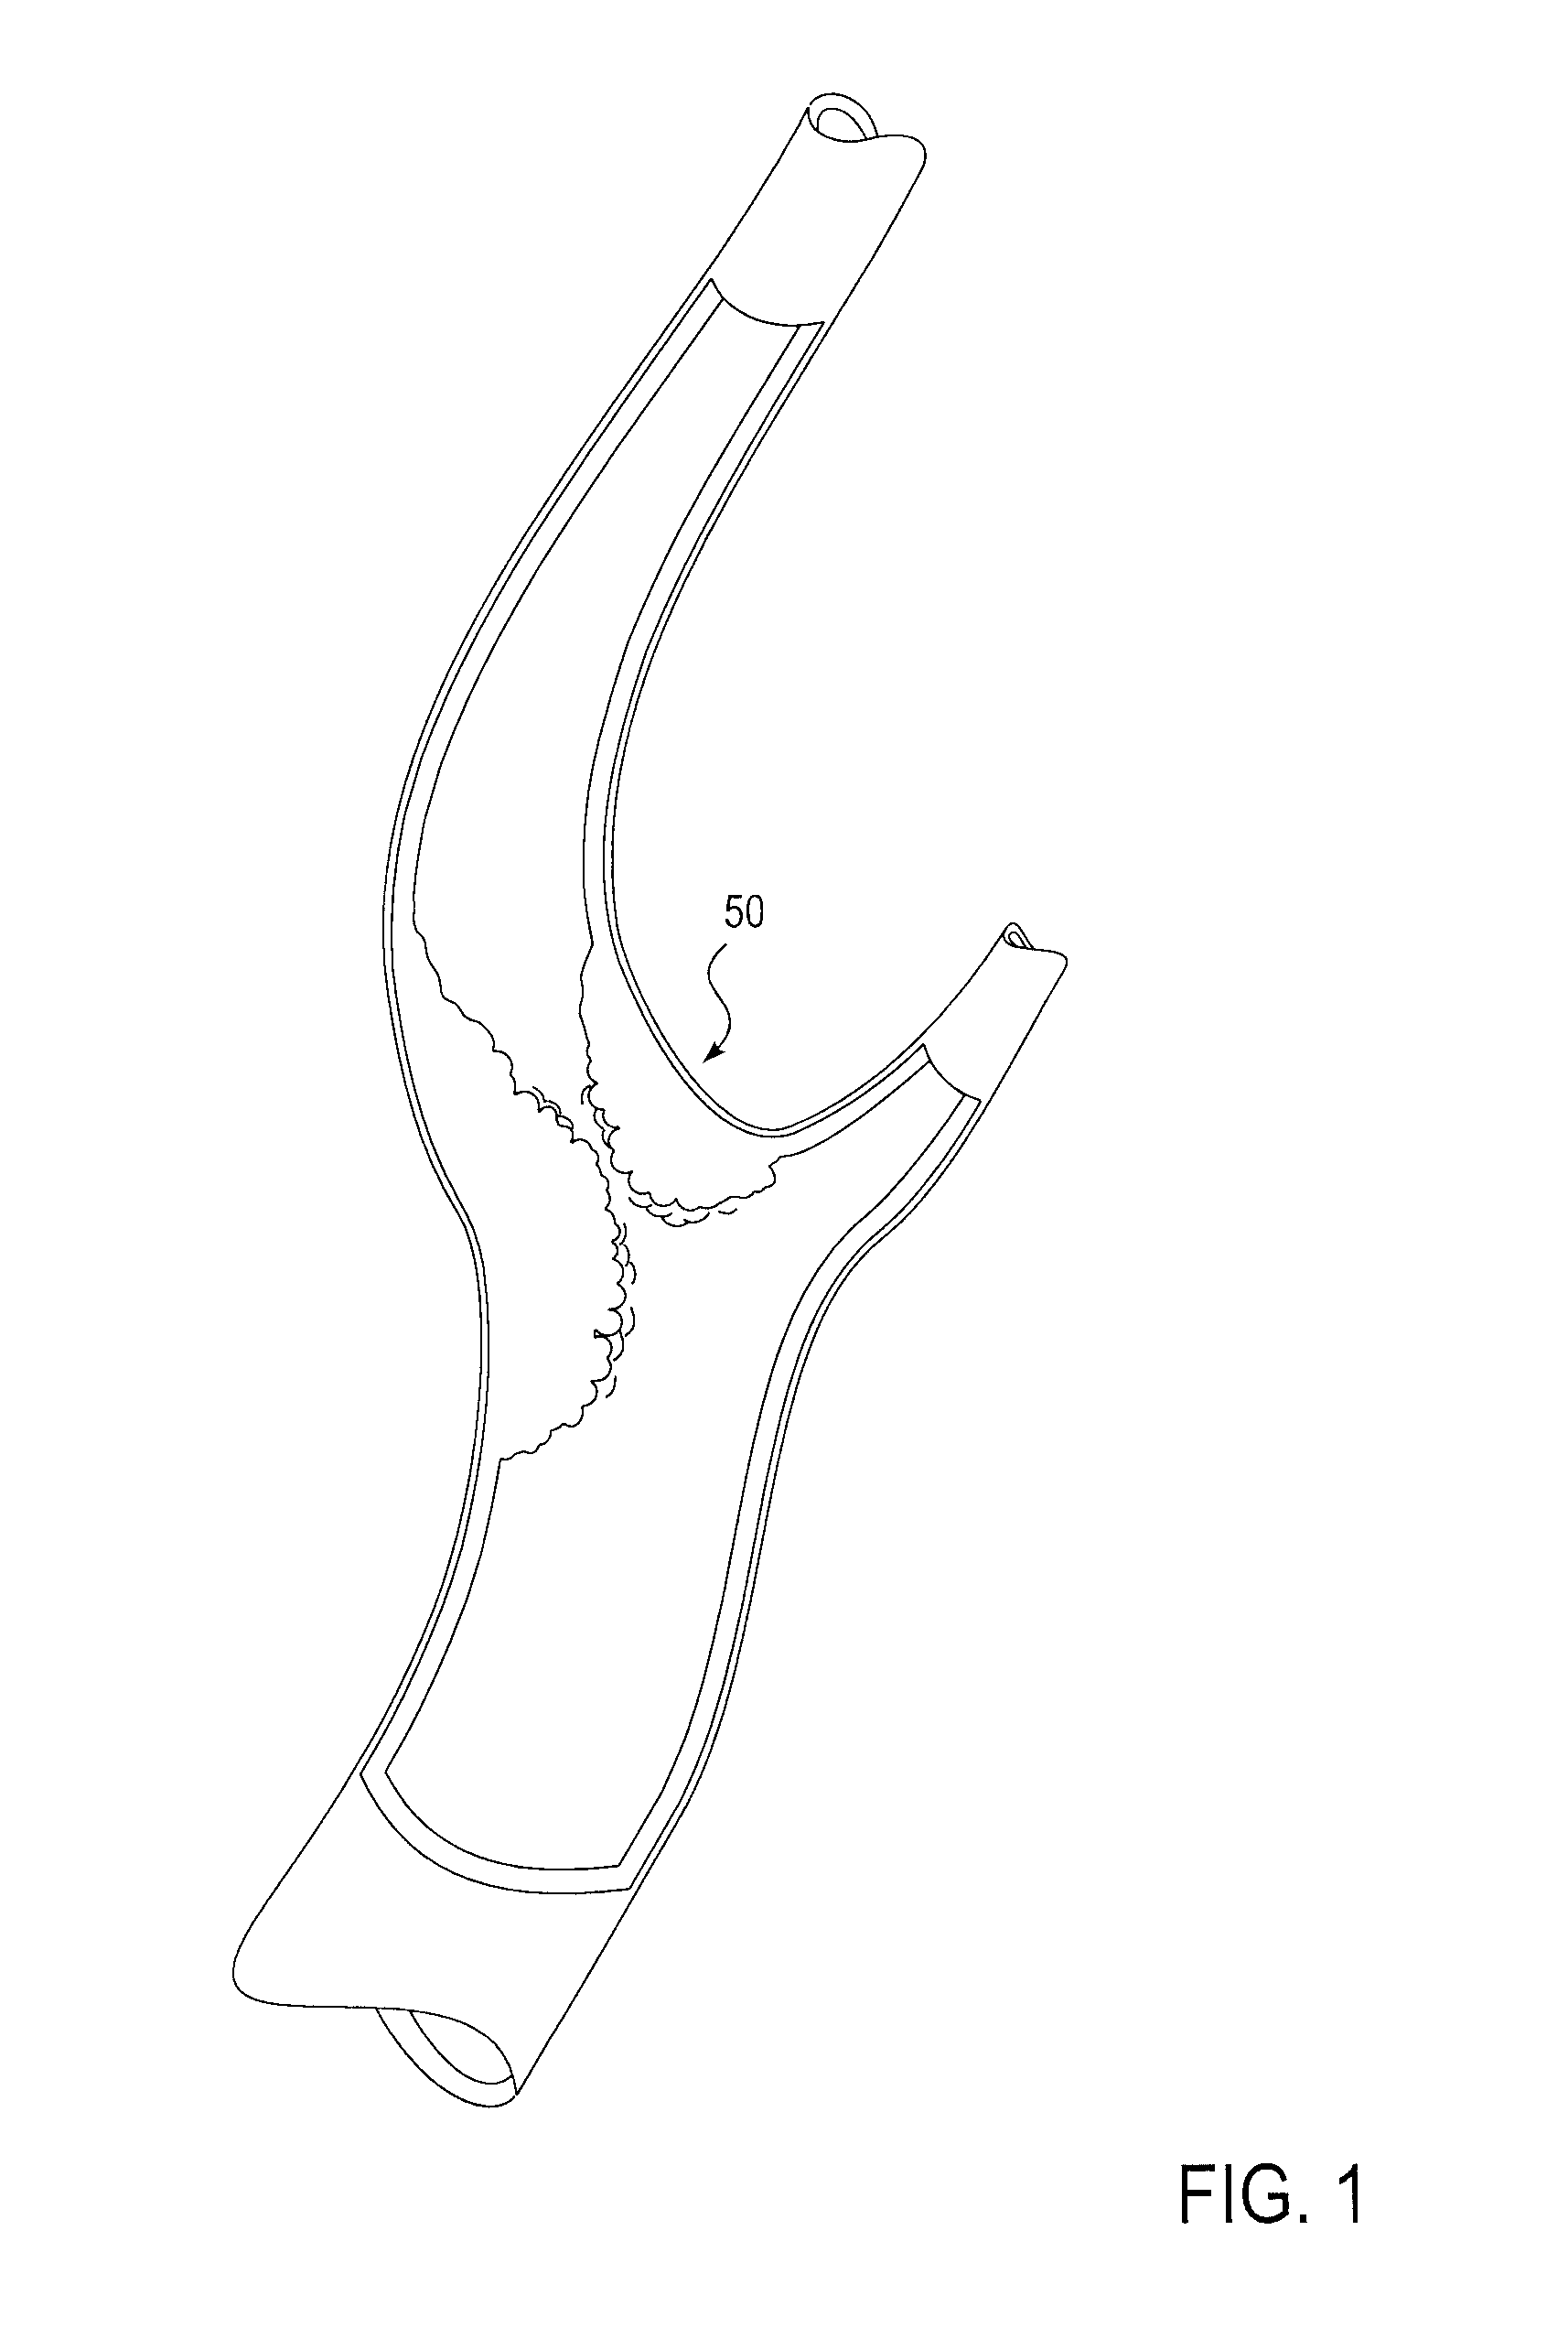 Catheter system for protected angioplasty and stenting at a carotid bifurcation